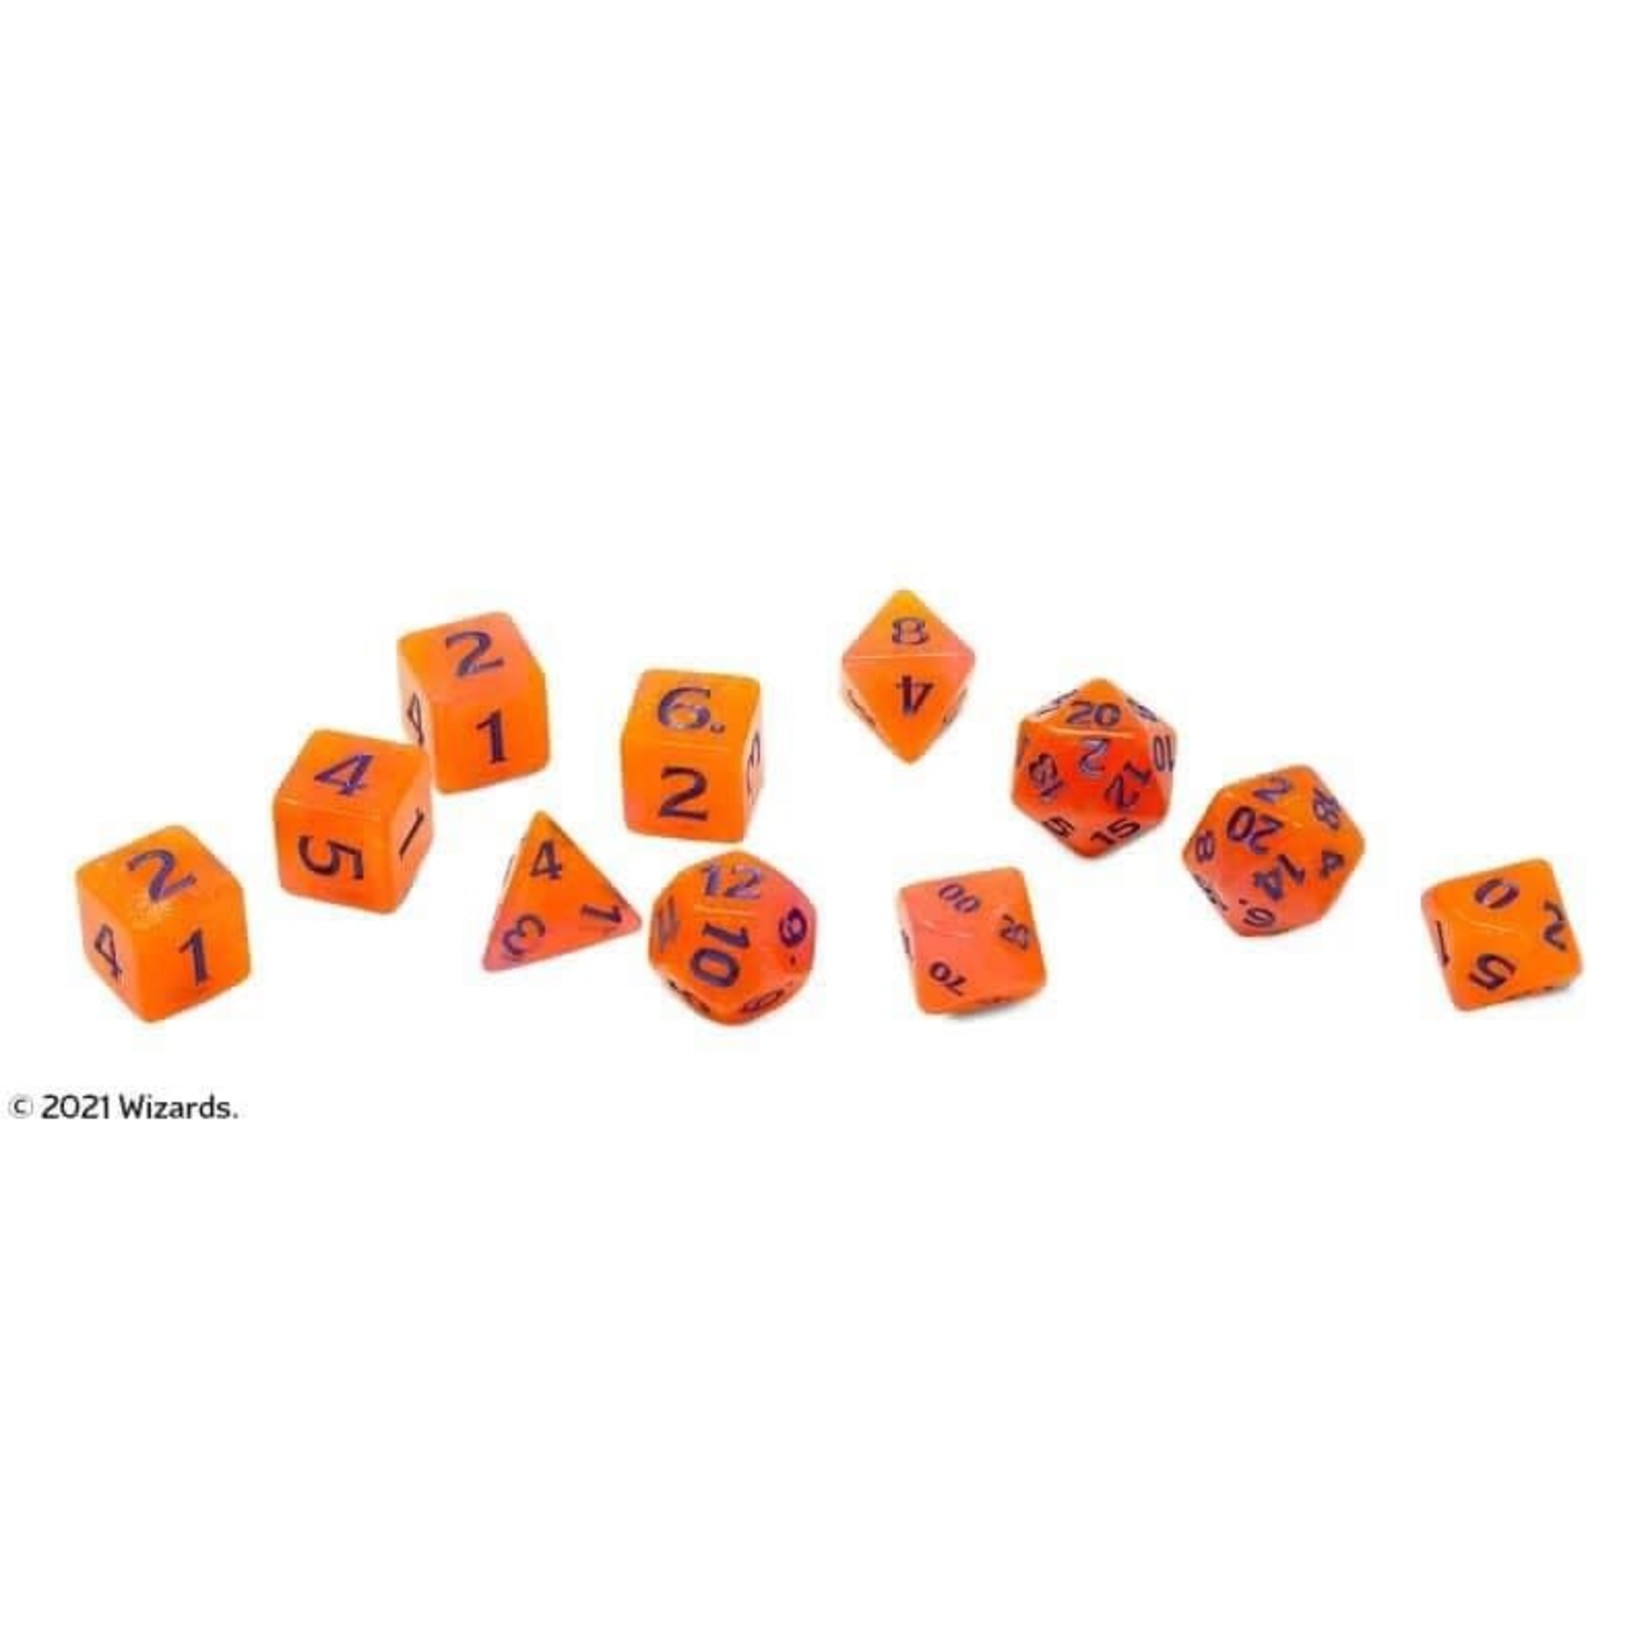 Dungeons and Dragons RPG: Witchlight Carnival Dice